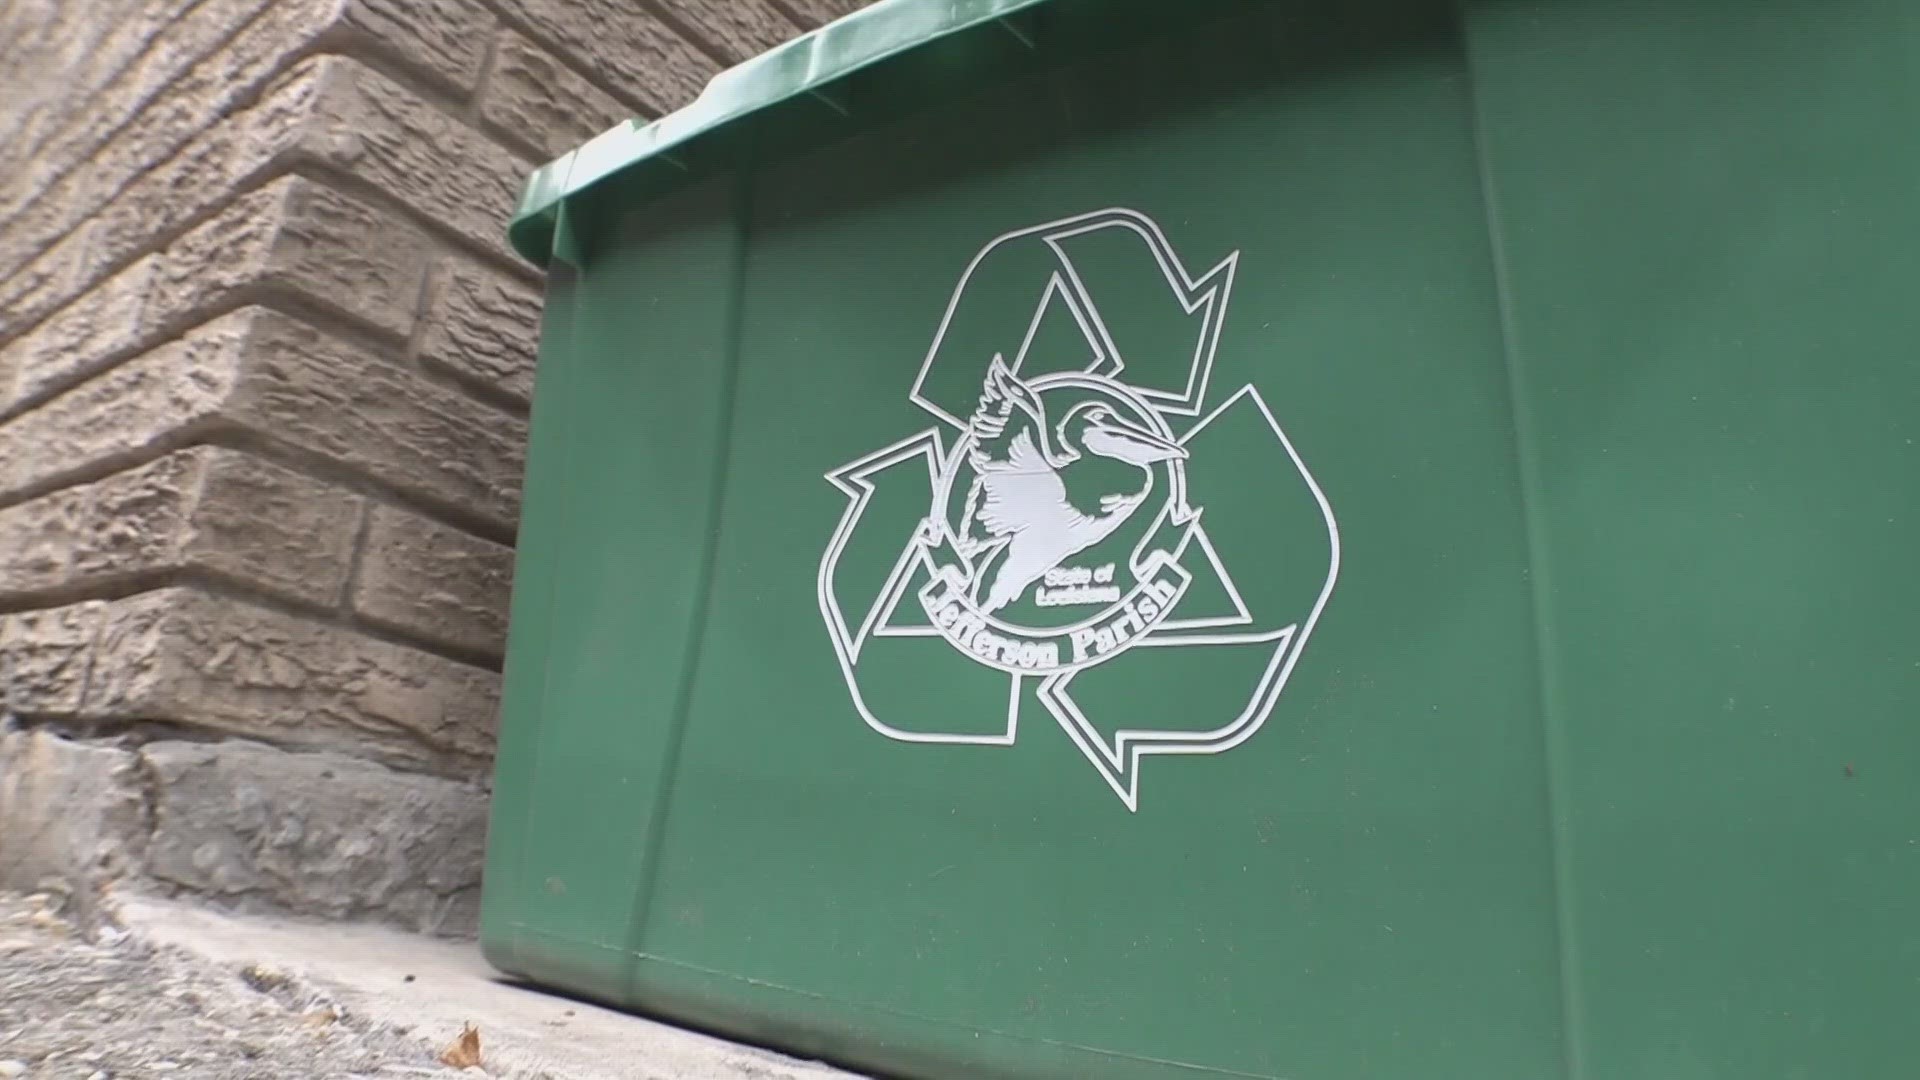 The fee for recycling has not yet been finalized, as they still need to complete negotiations.